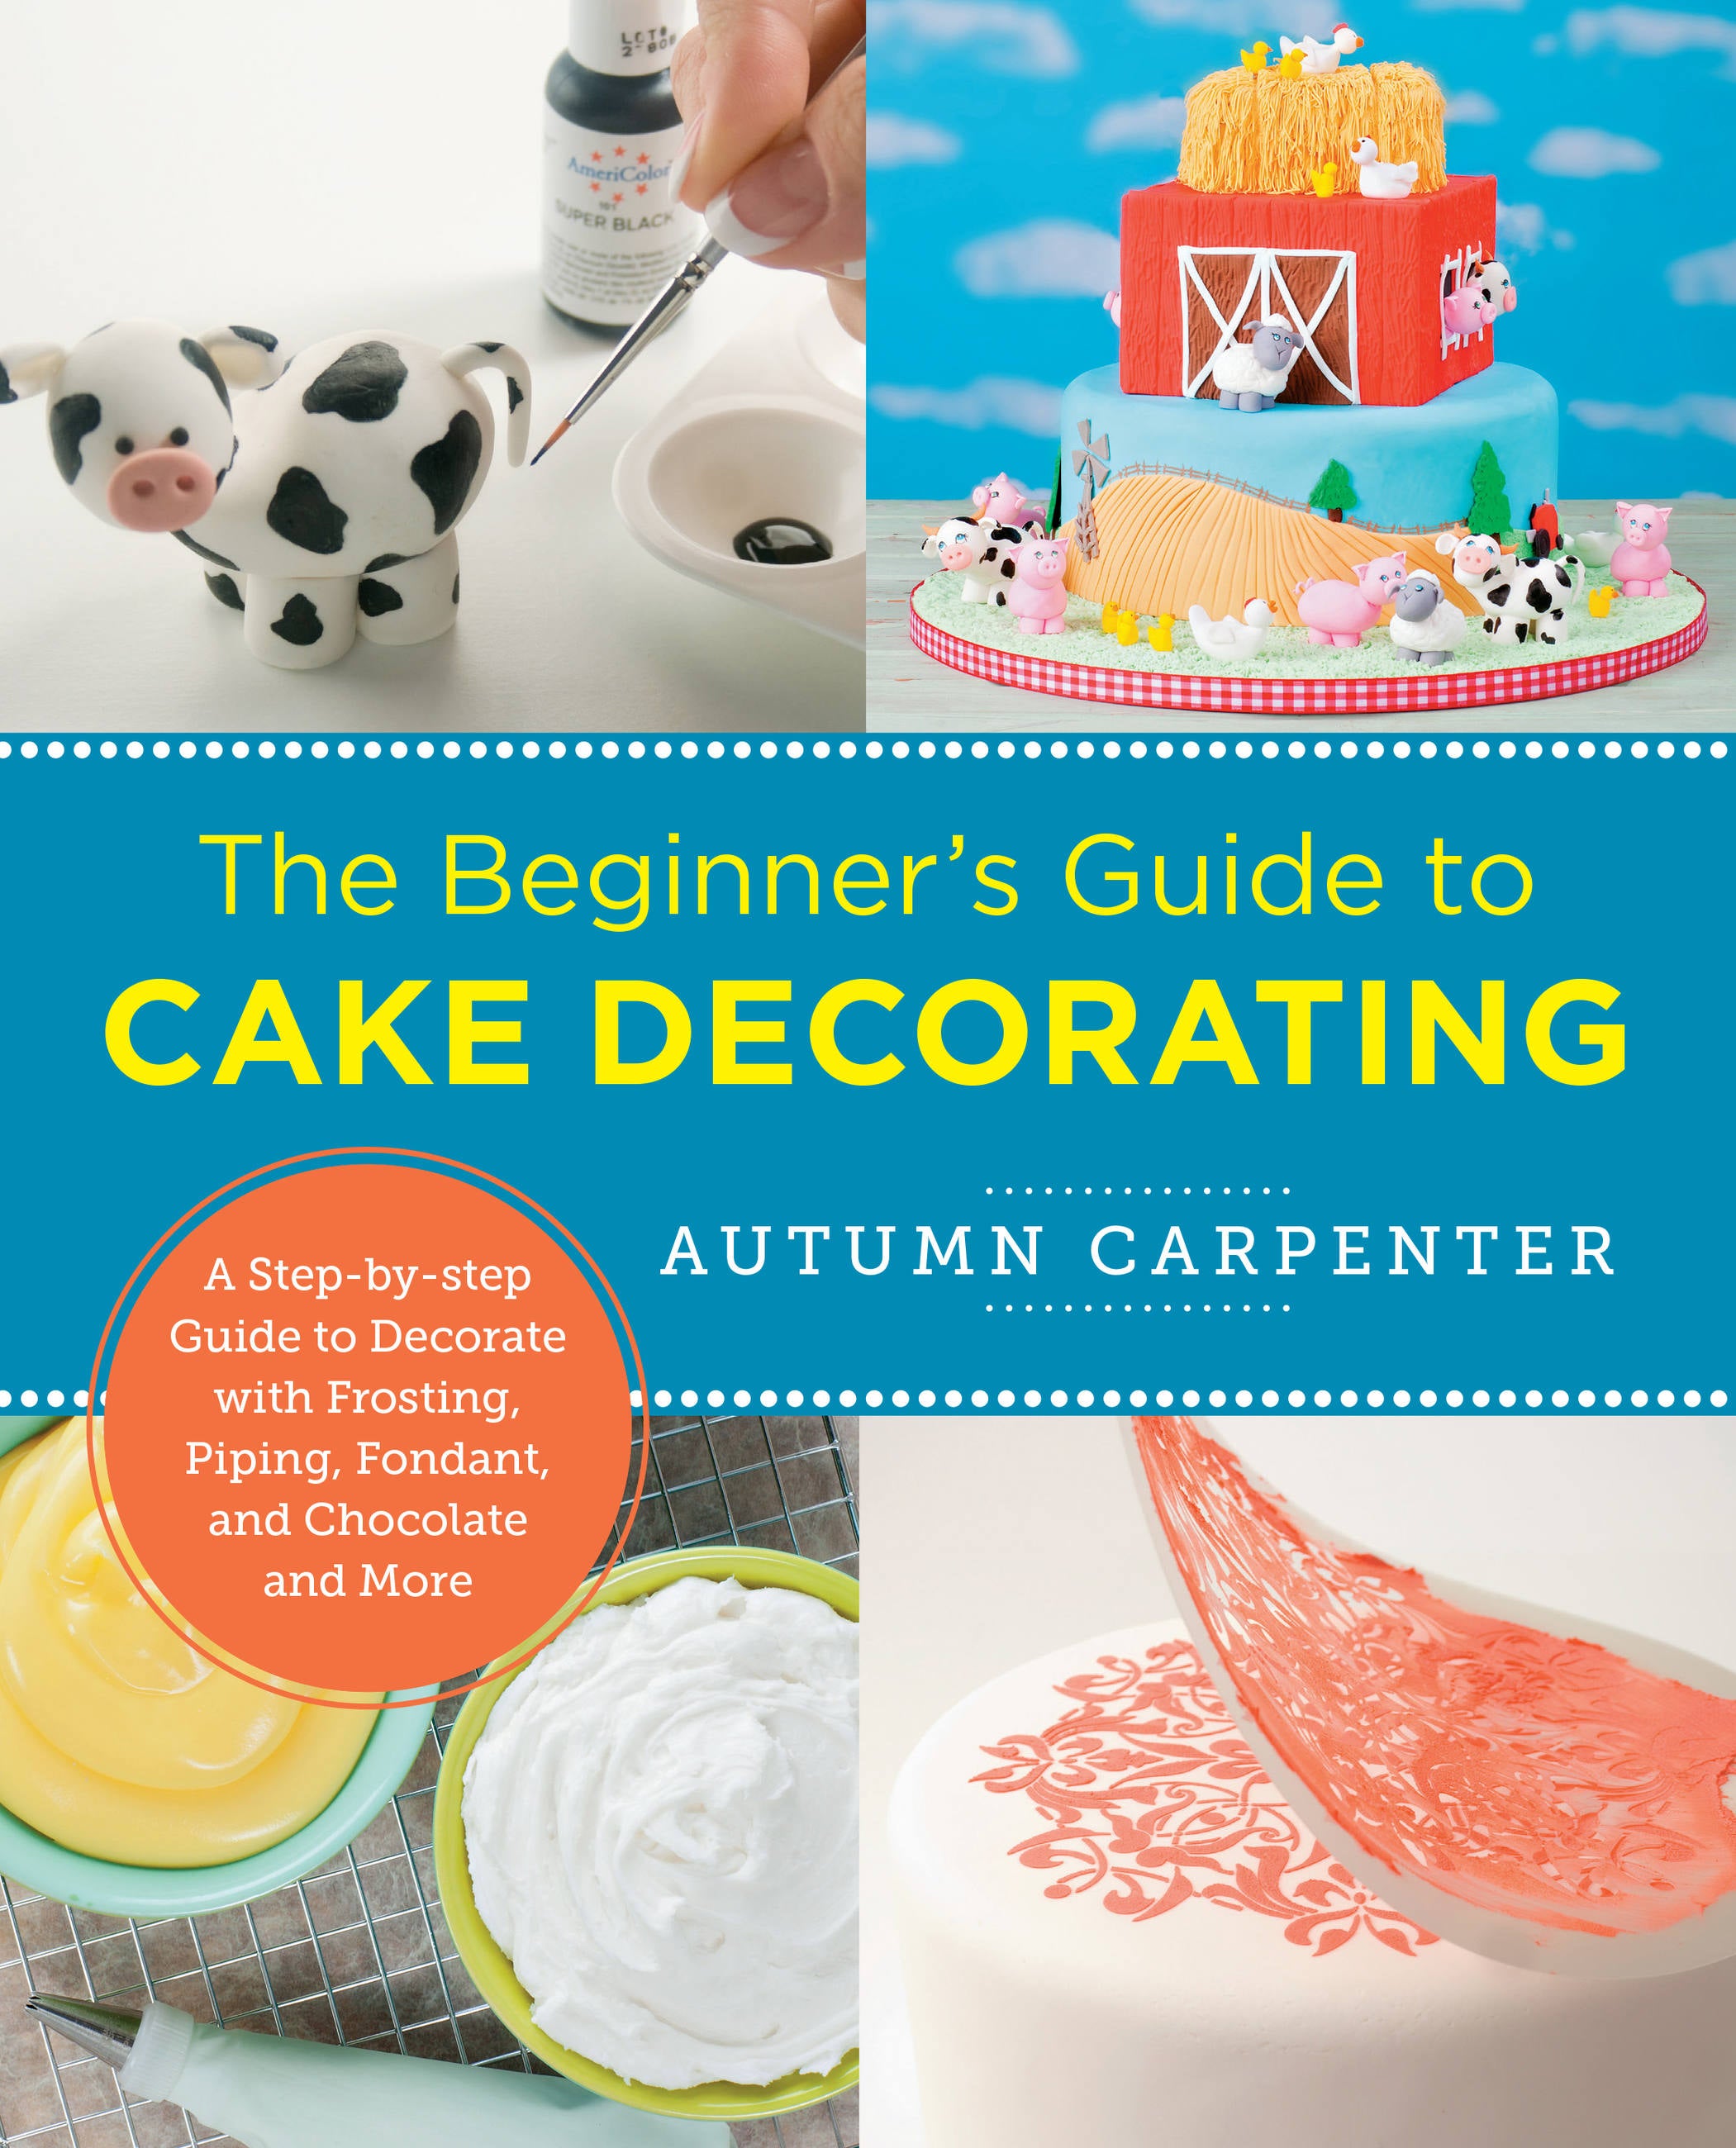 A Piece of Cake Decorating Idea - In My Own Style